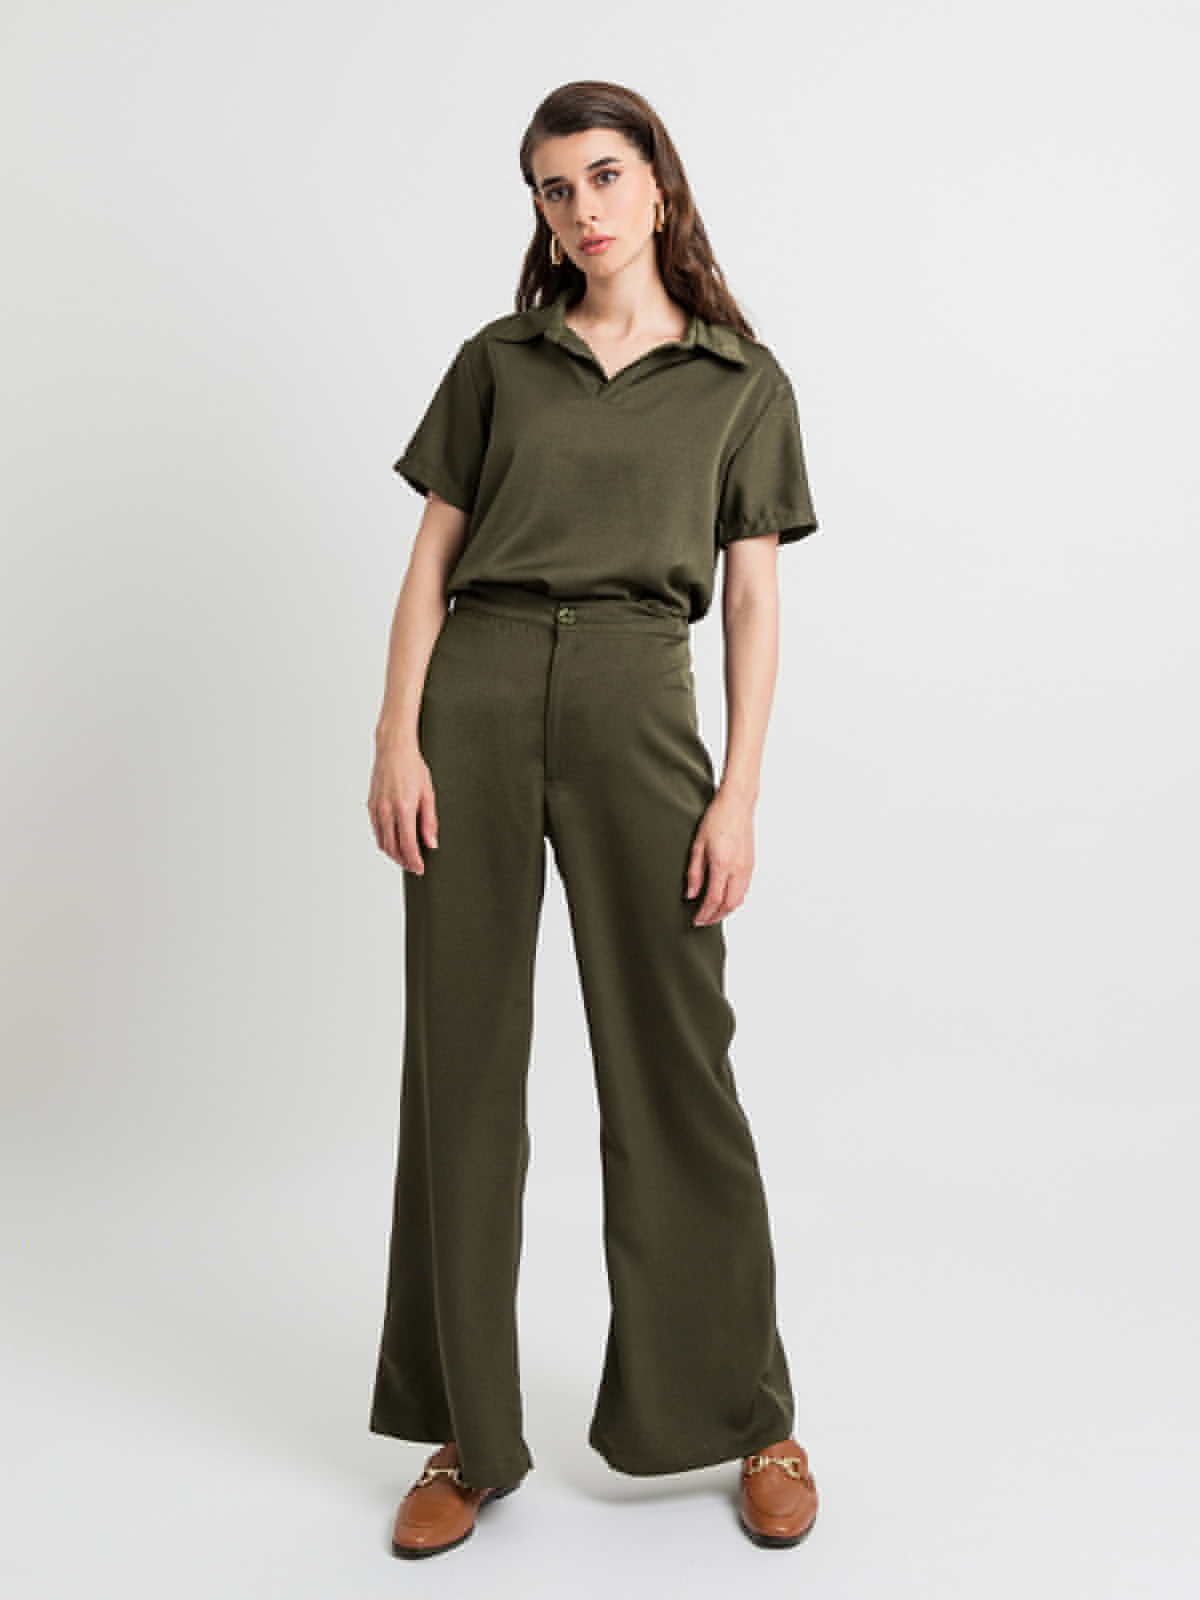 Olive - Flared Pants With Polo Shirt Set in Soft & Silky-feel Fabric